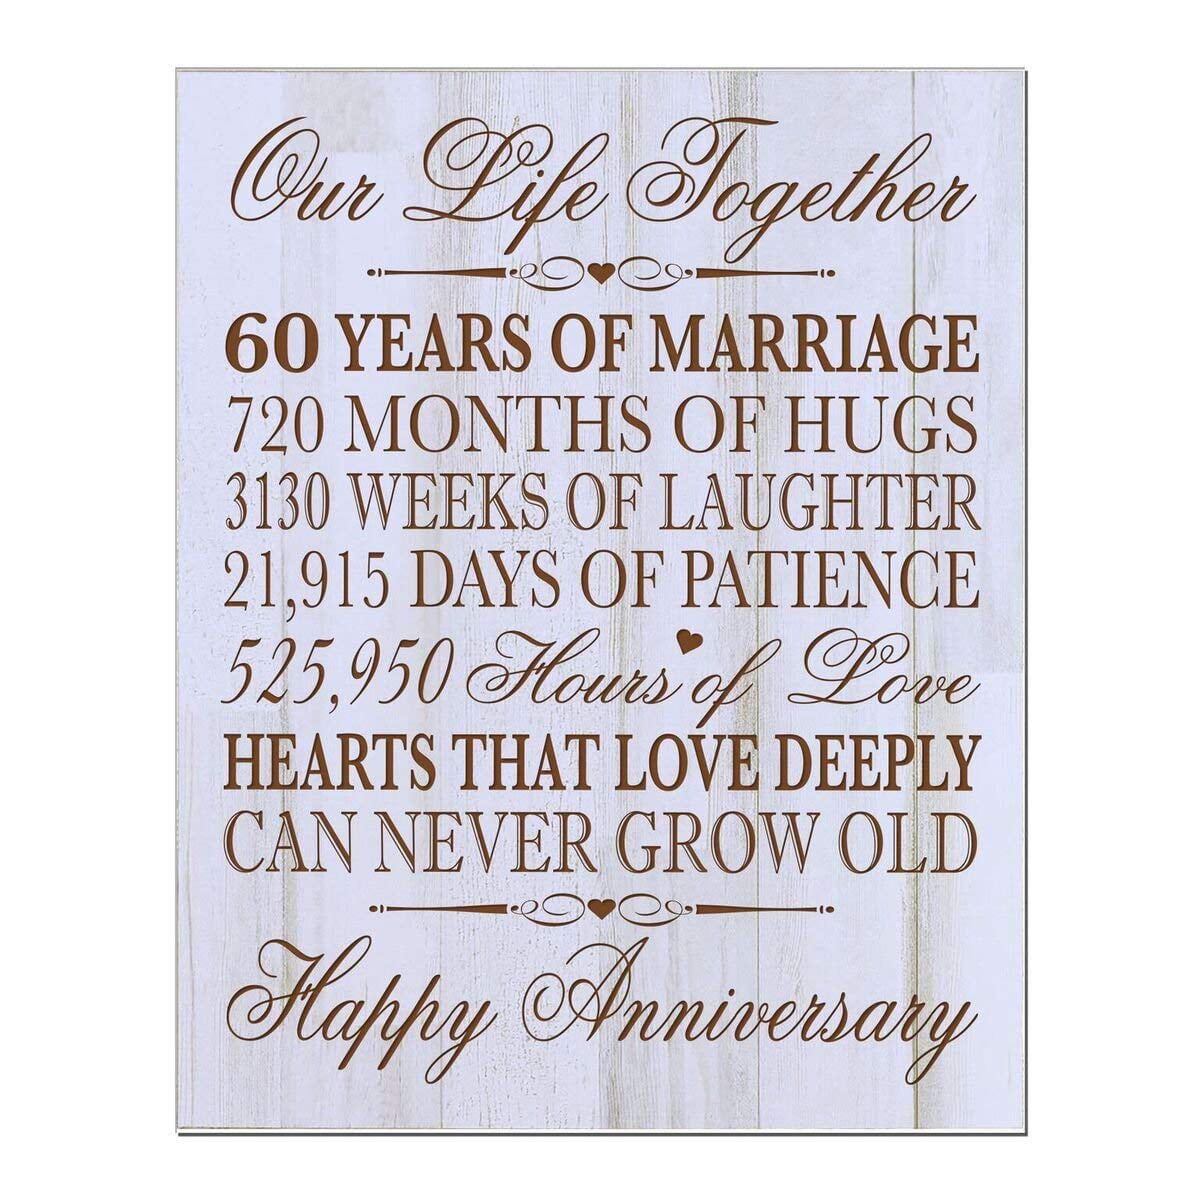 Digitally Printed 60th Anniversary Wall Decor Plaque - Our Life -  